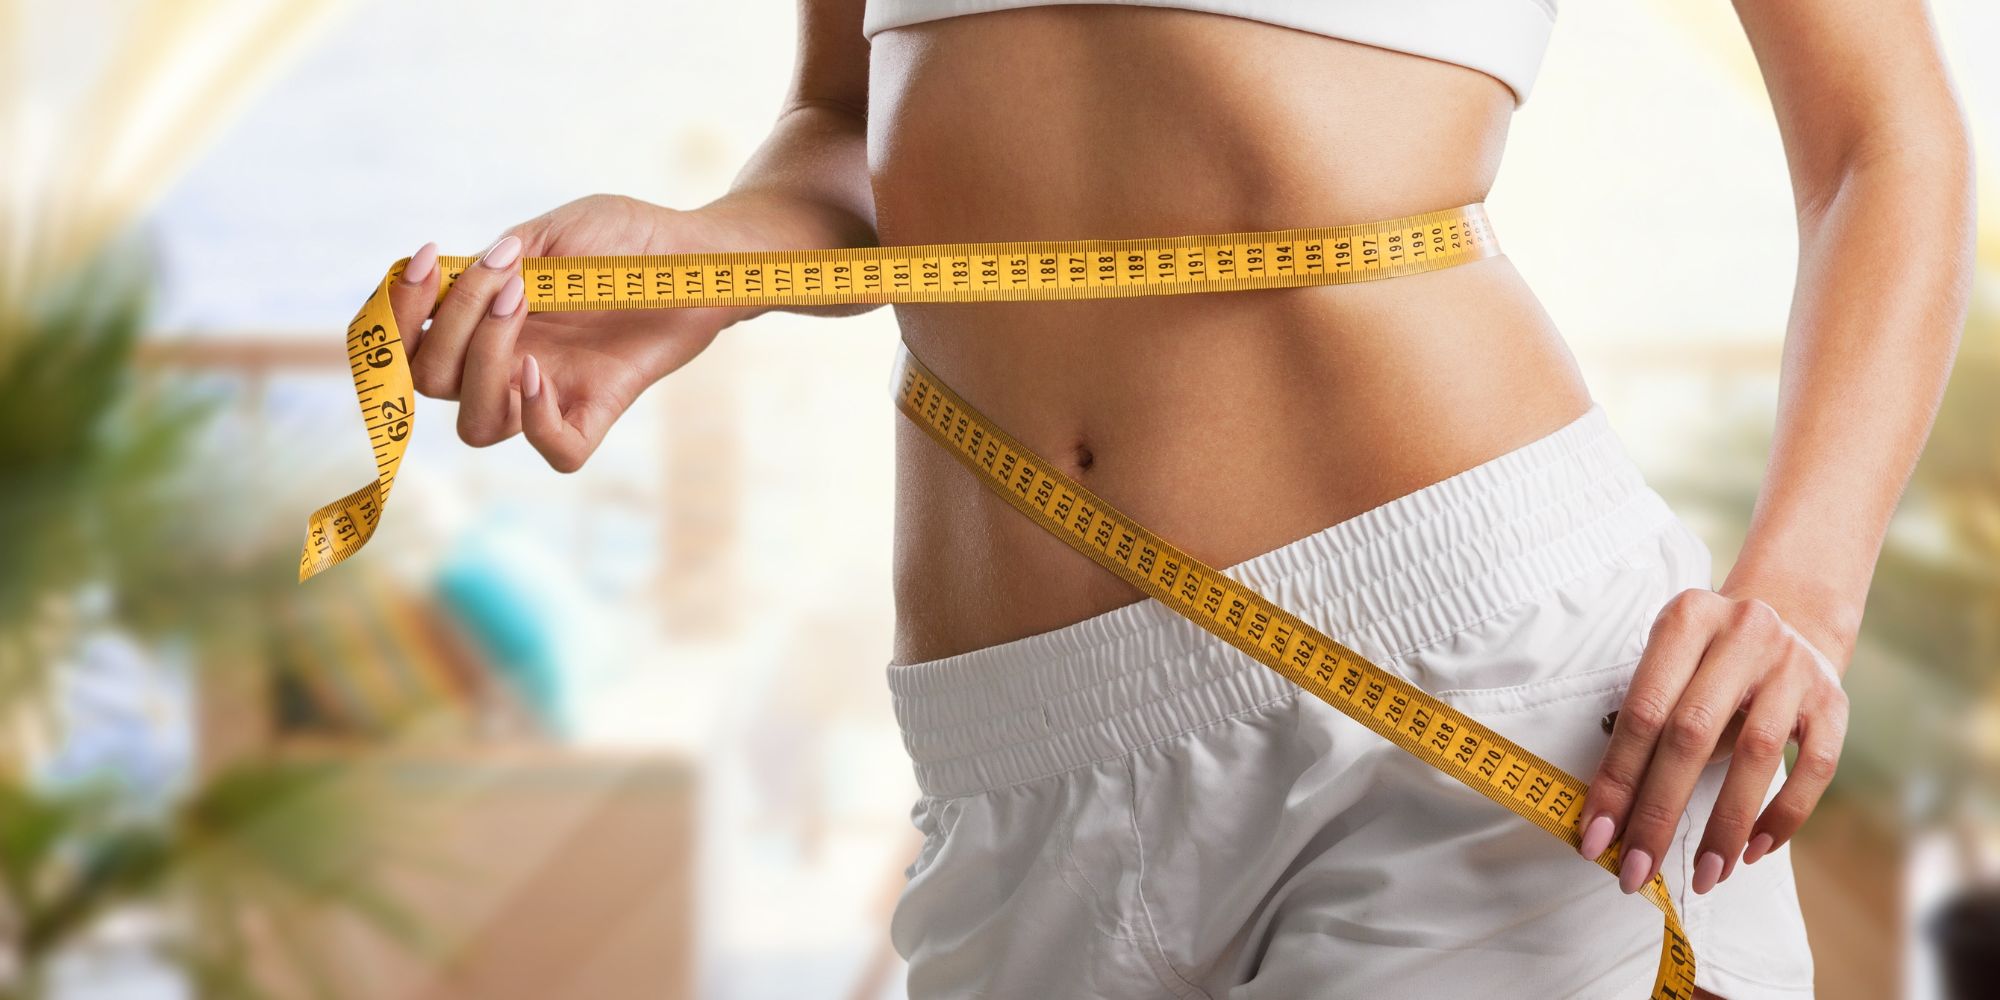 MEDICALLY SUPERVISED WEIGHT LOSS PROGRAM